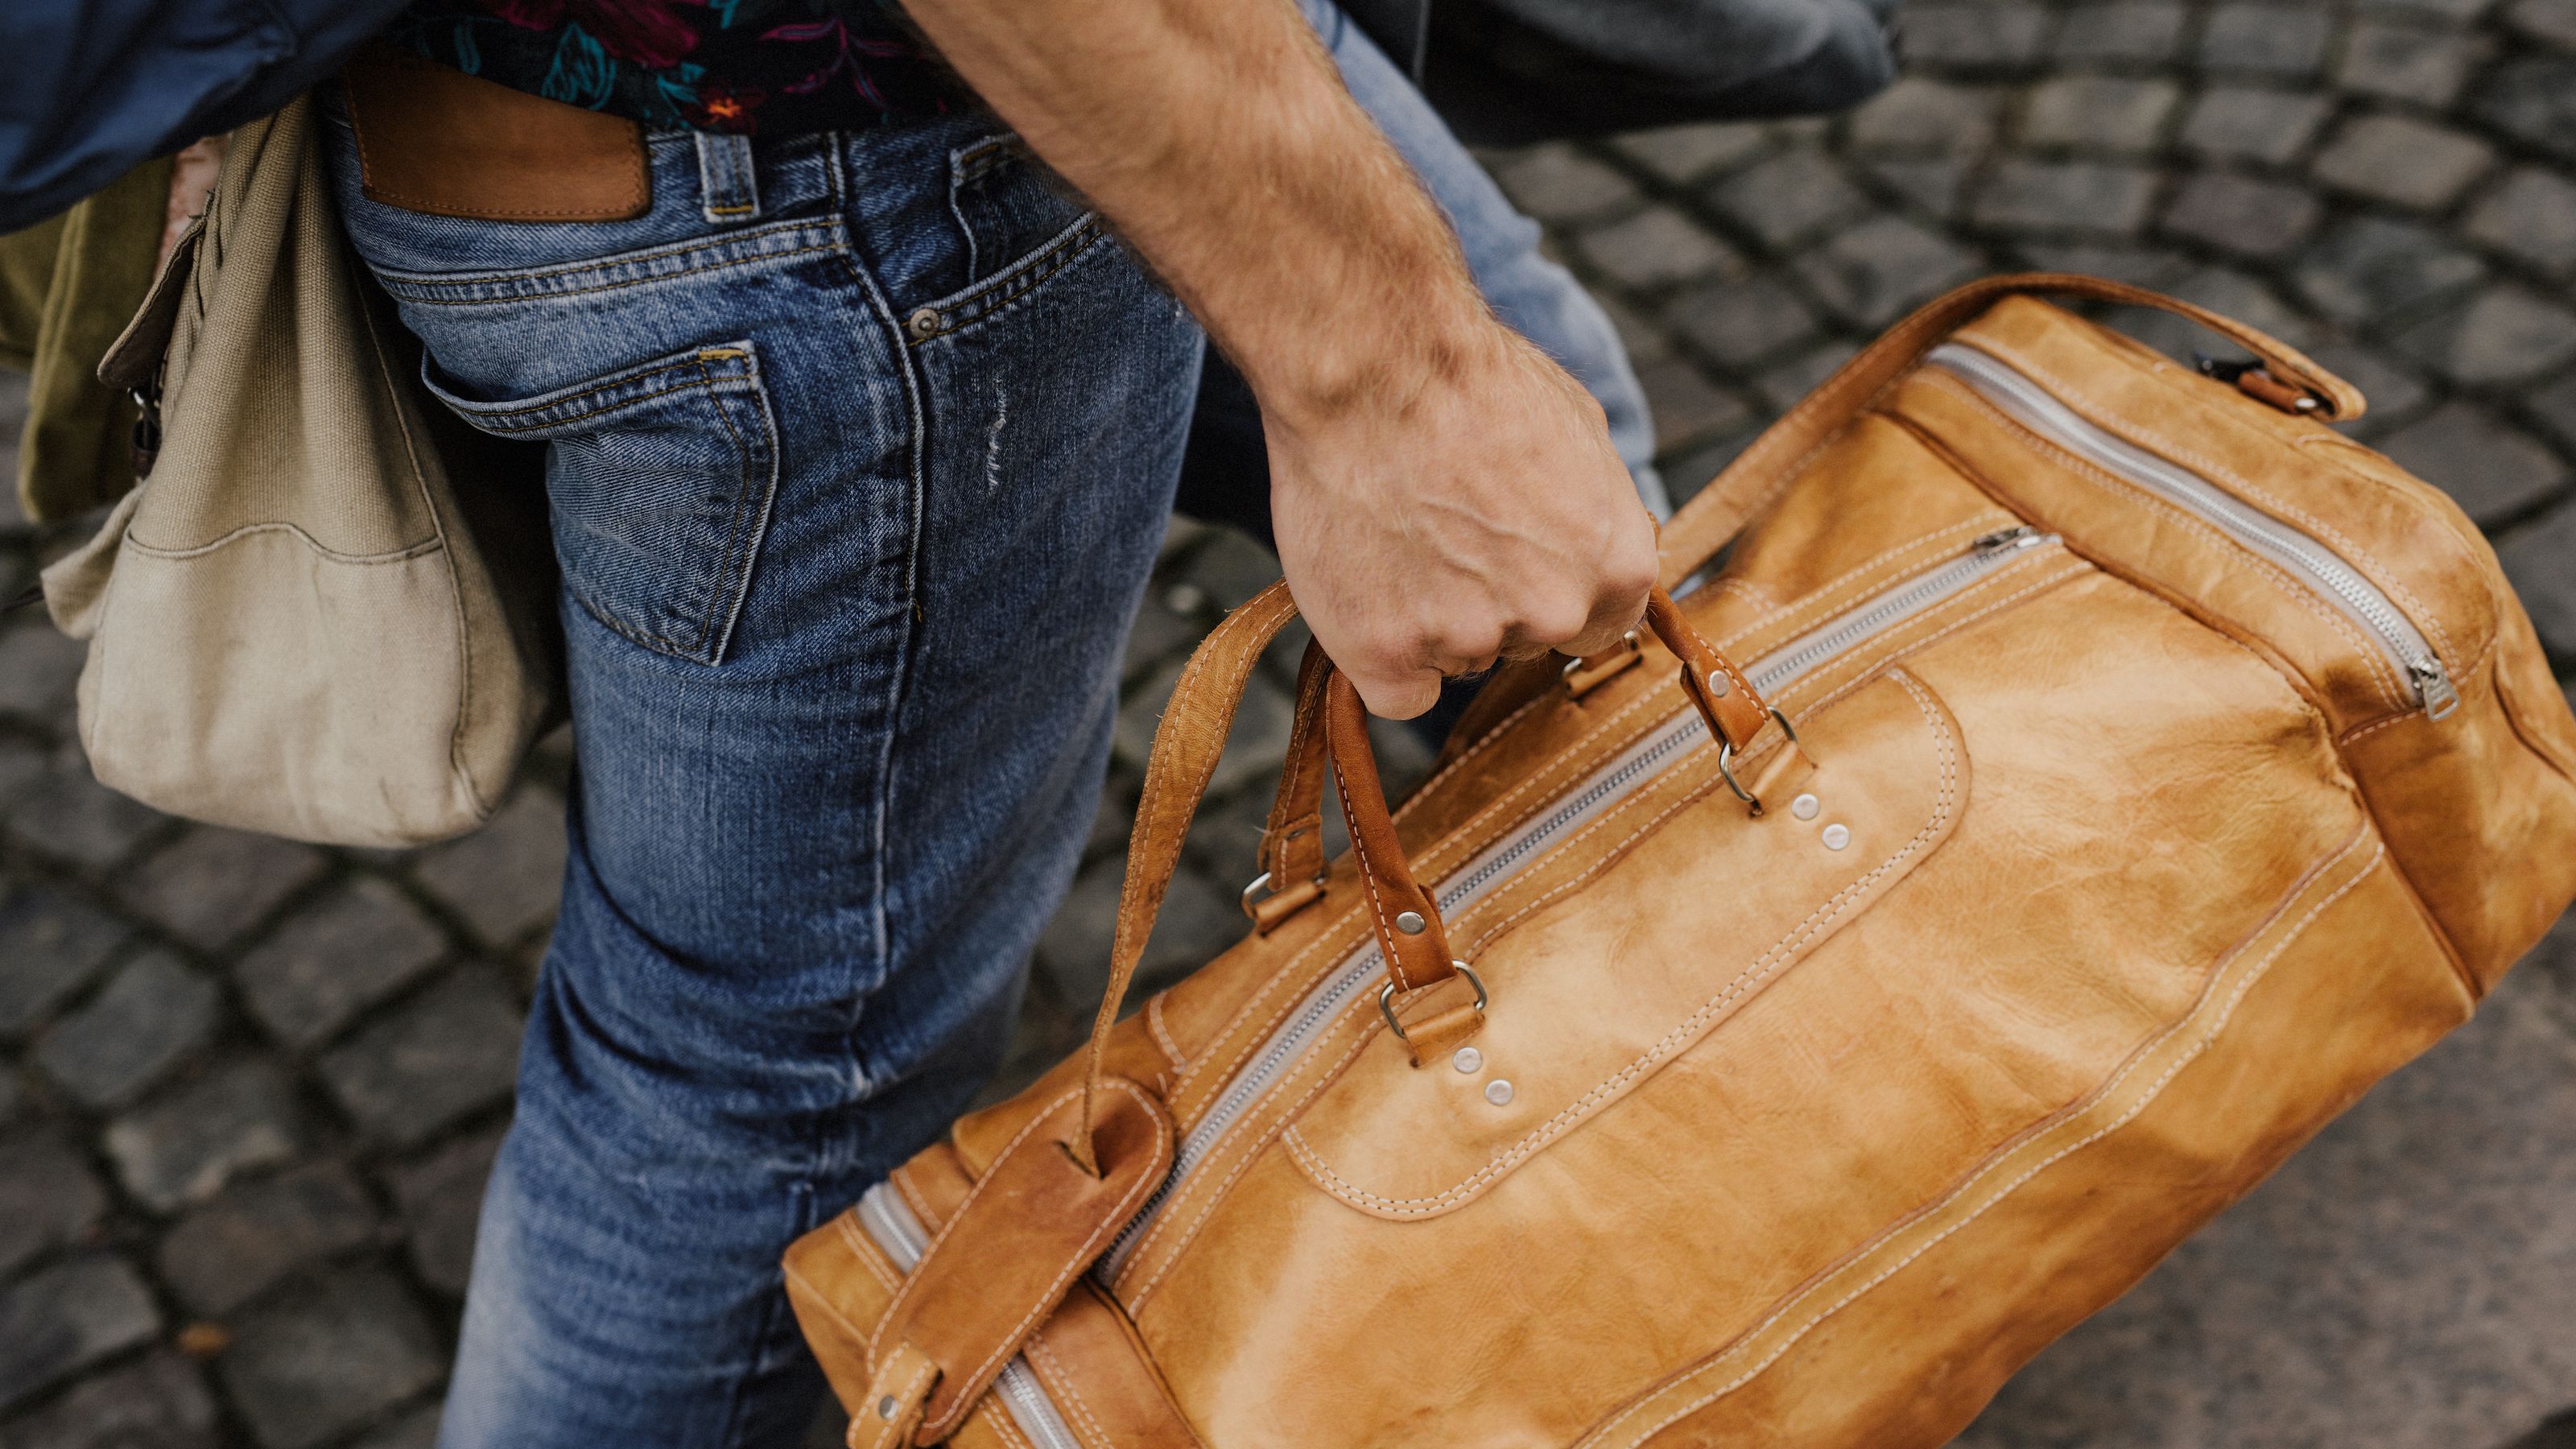 26 stylish and practical weekender bags for your next mini getaway | CNN Underscored